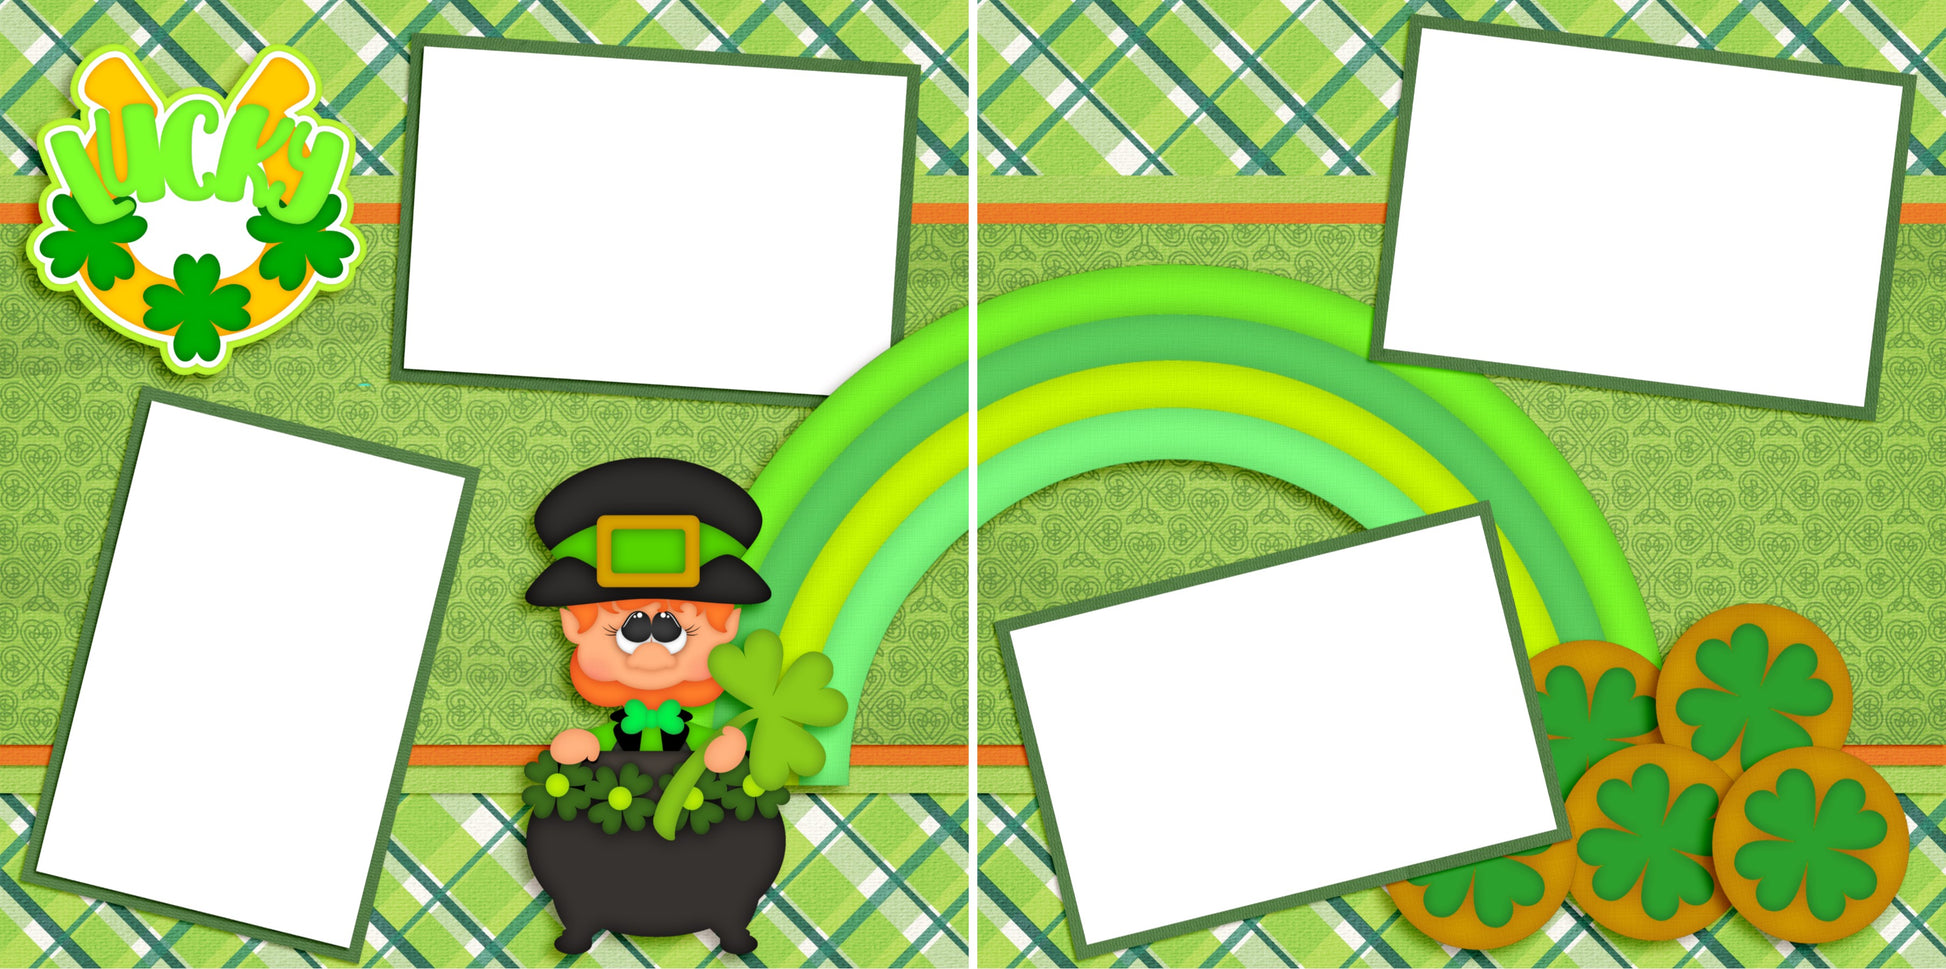 Lucky - St Patrick's Day - Digital Scrapbook Pages - INSTANT DOWNLOAD - 2019 - EZscrapbooks Scrapbook Layouts St Patrick's Day